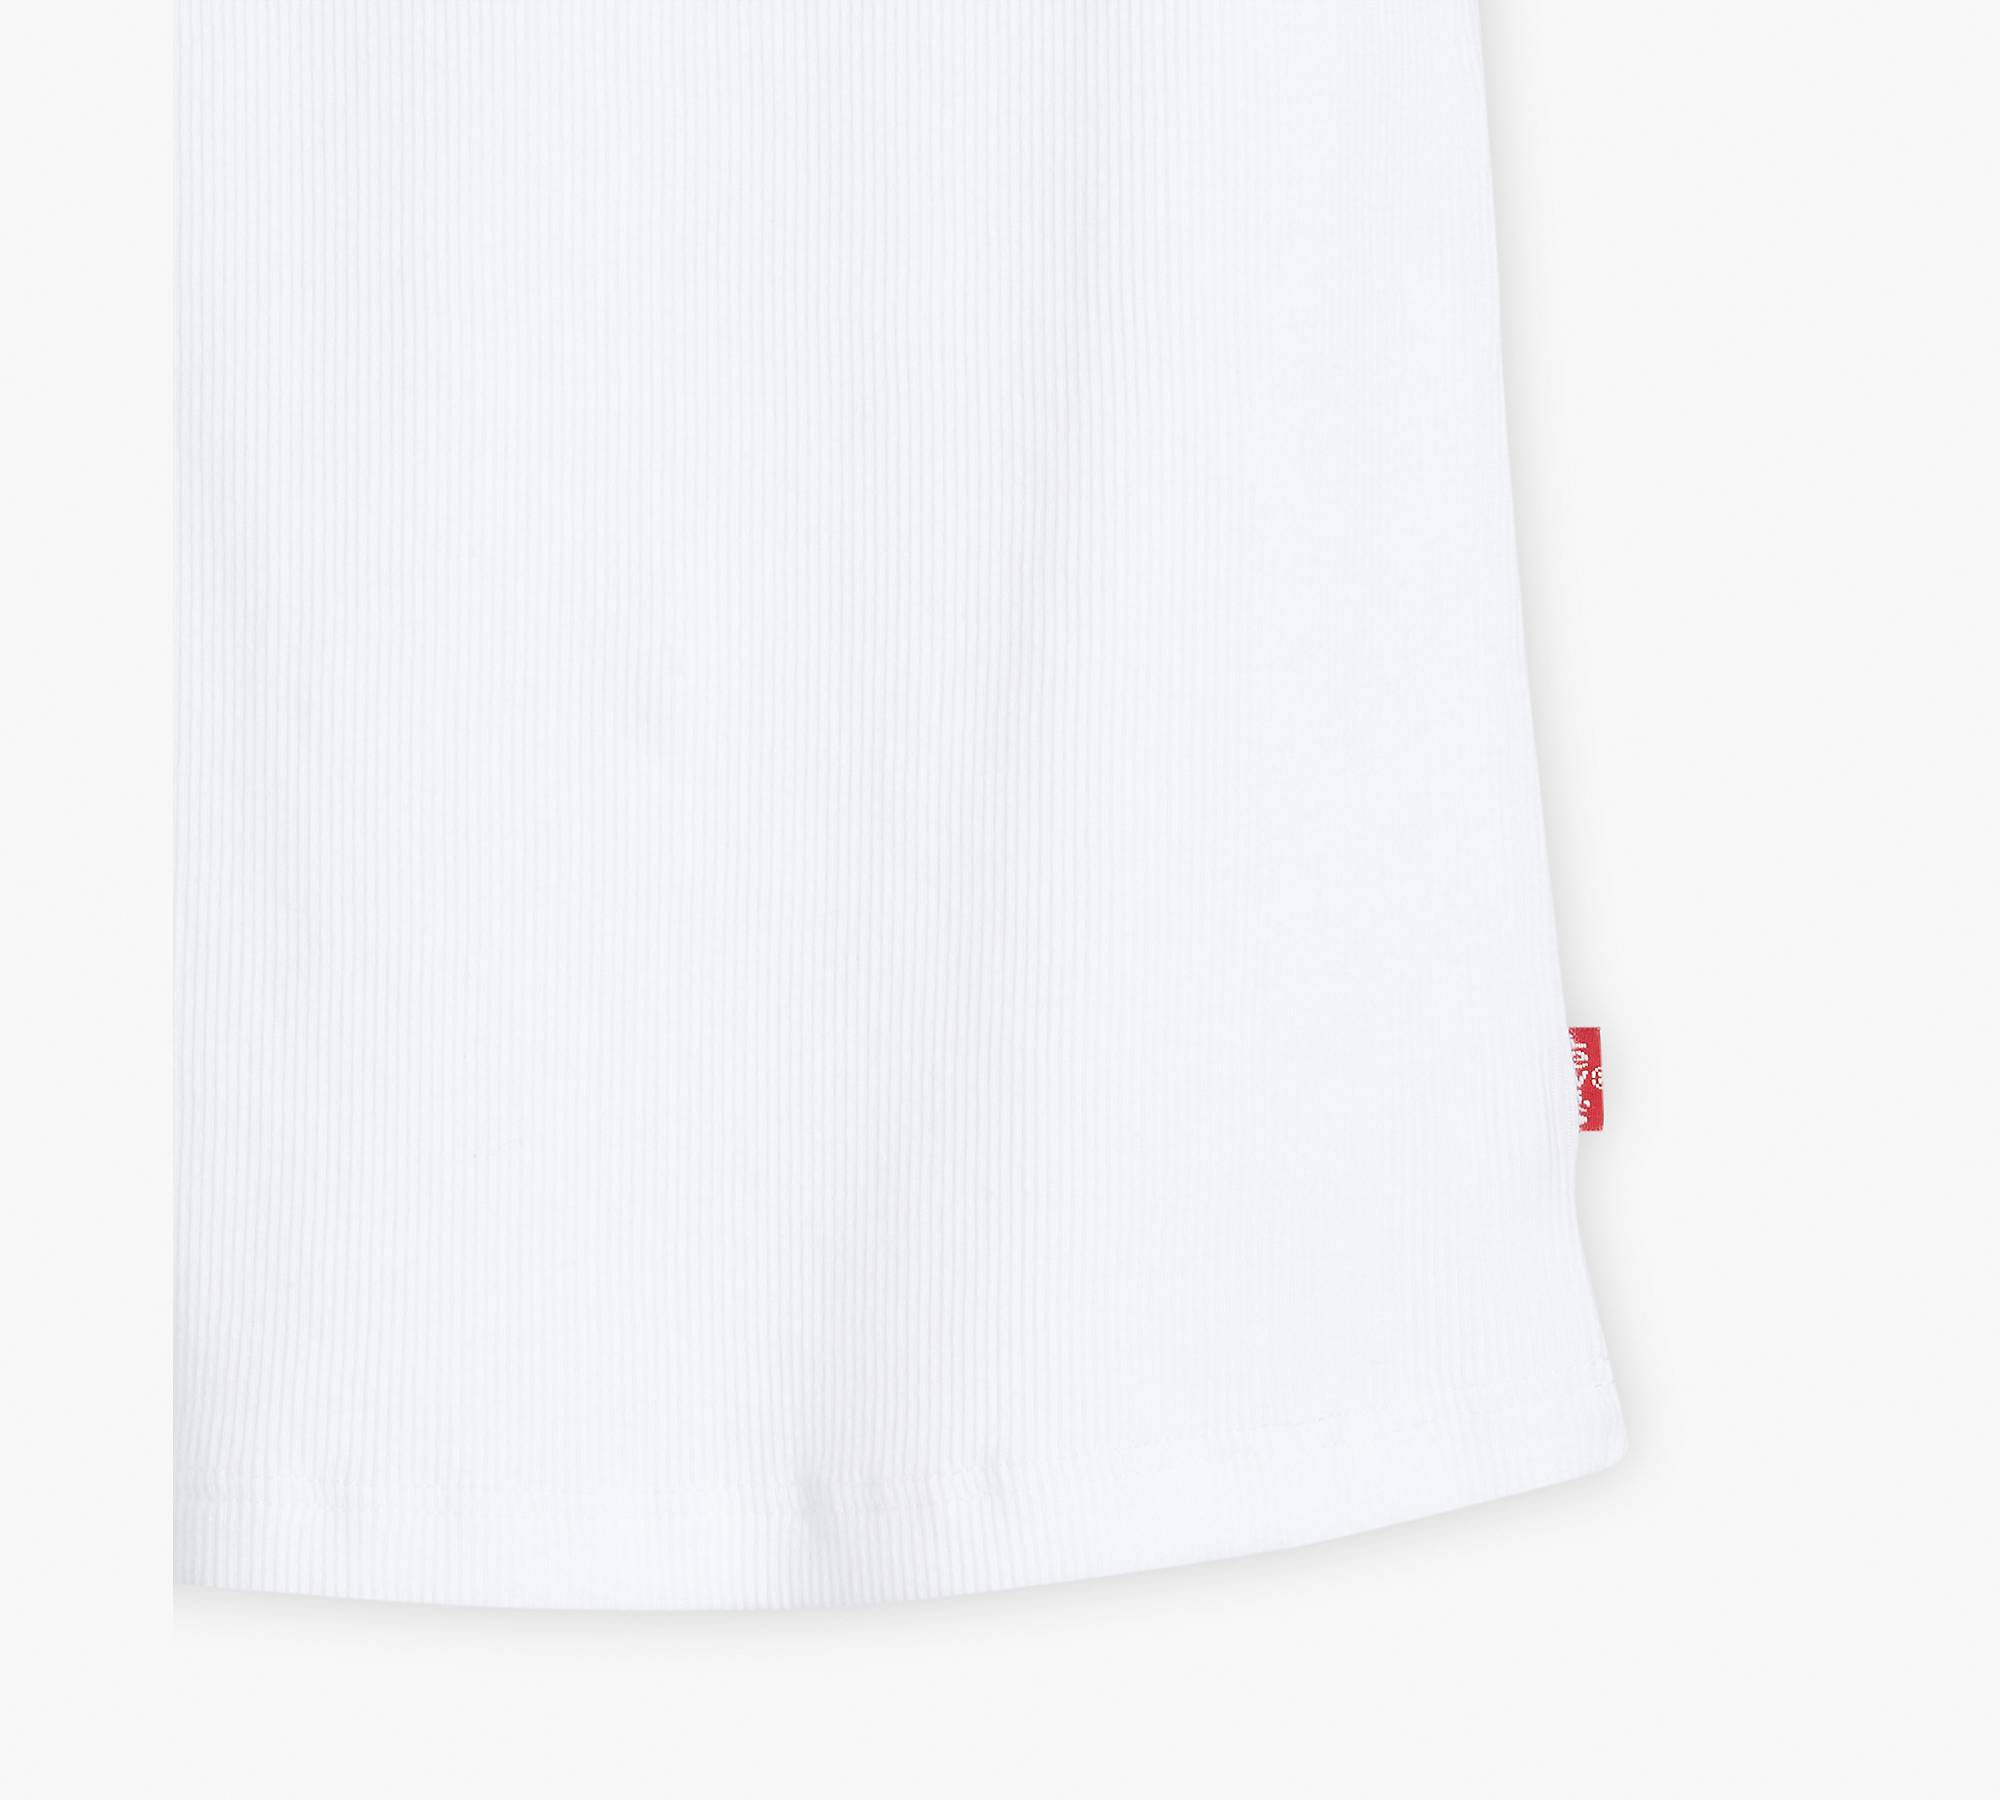 Classic Fit Tank Top - White | Levi's® US